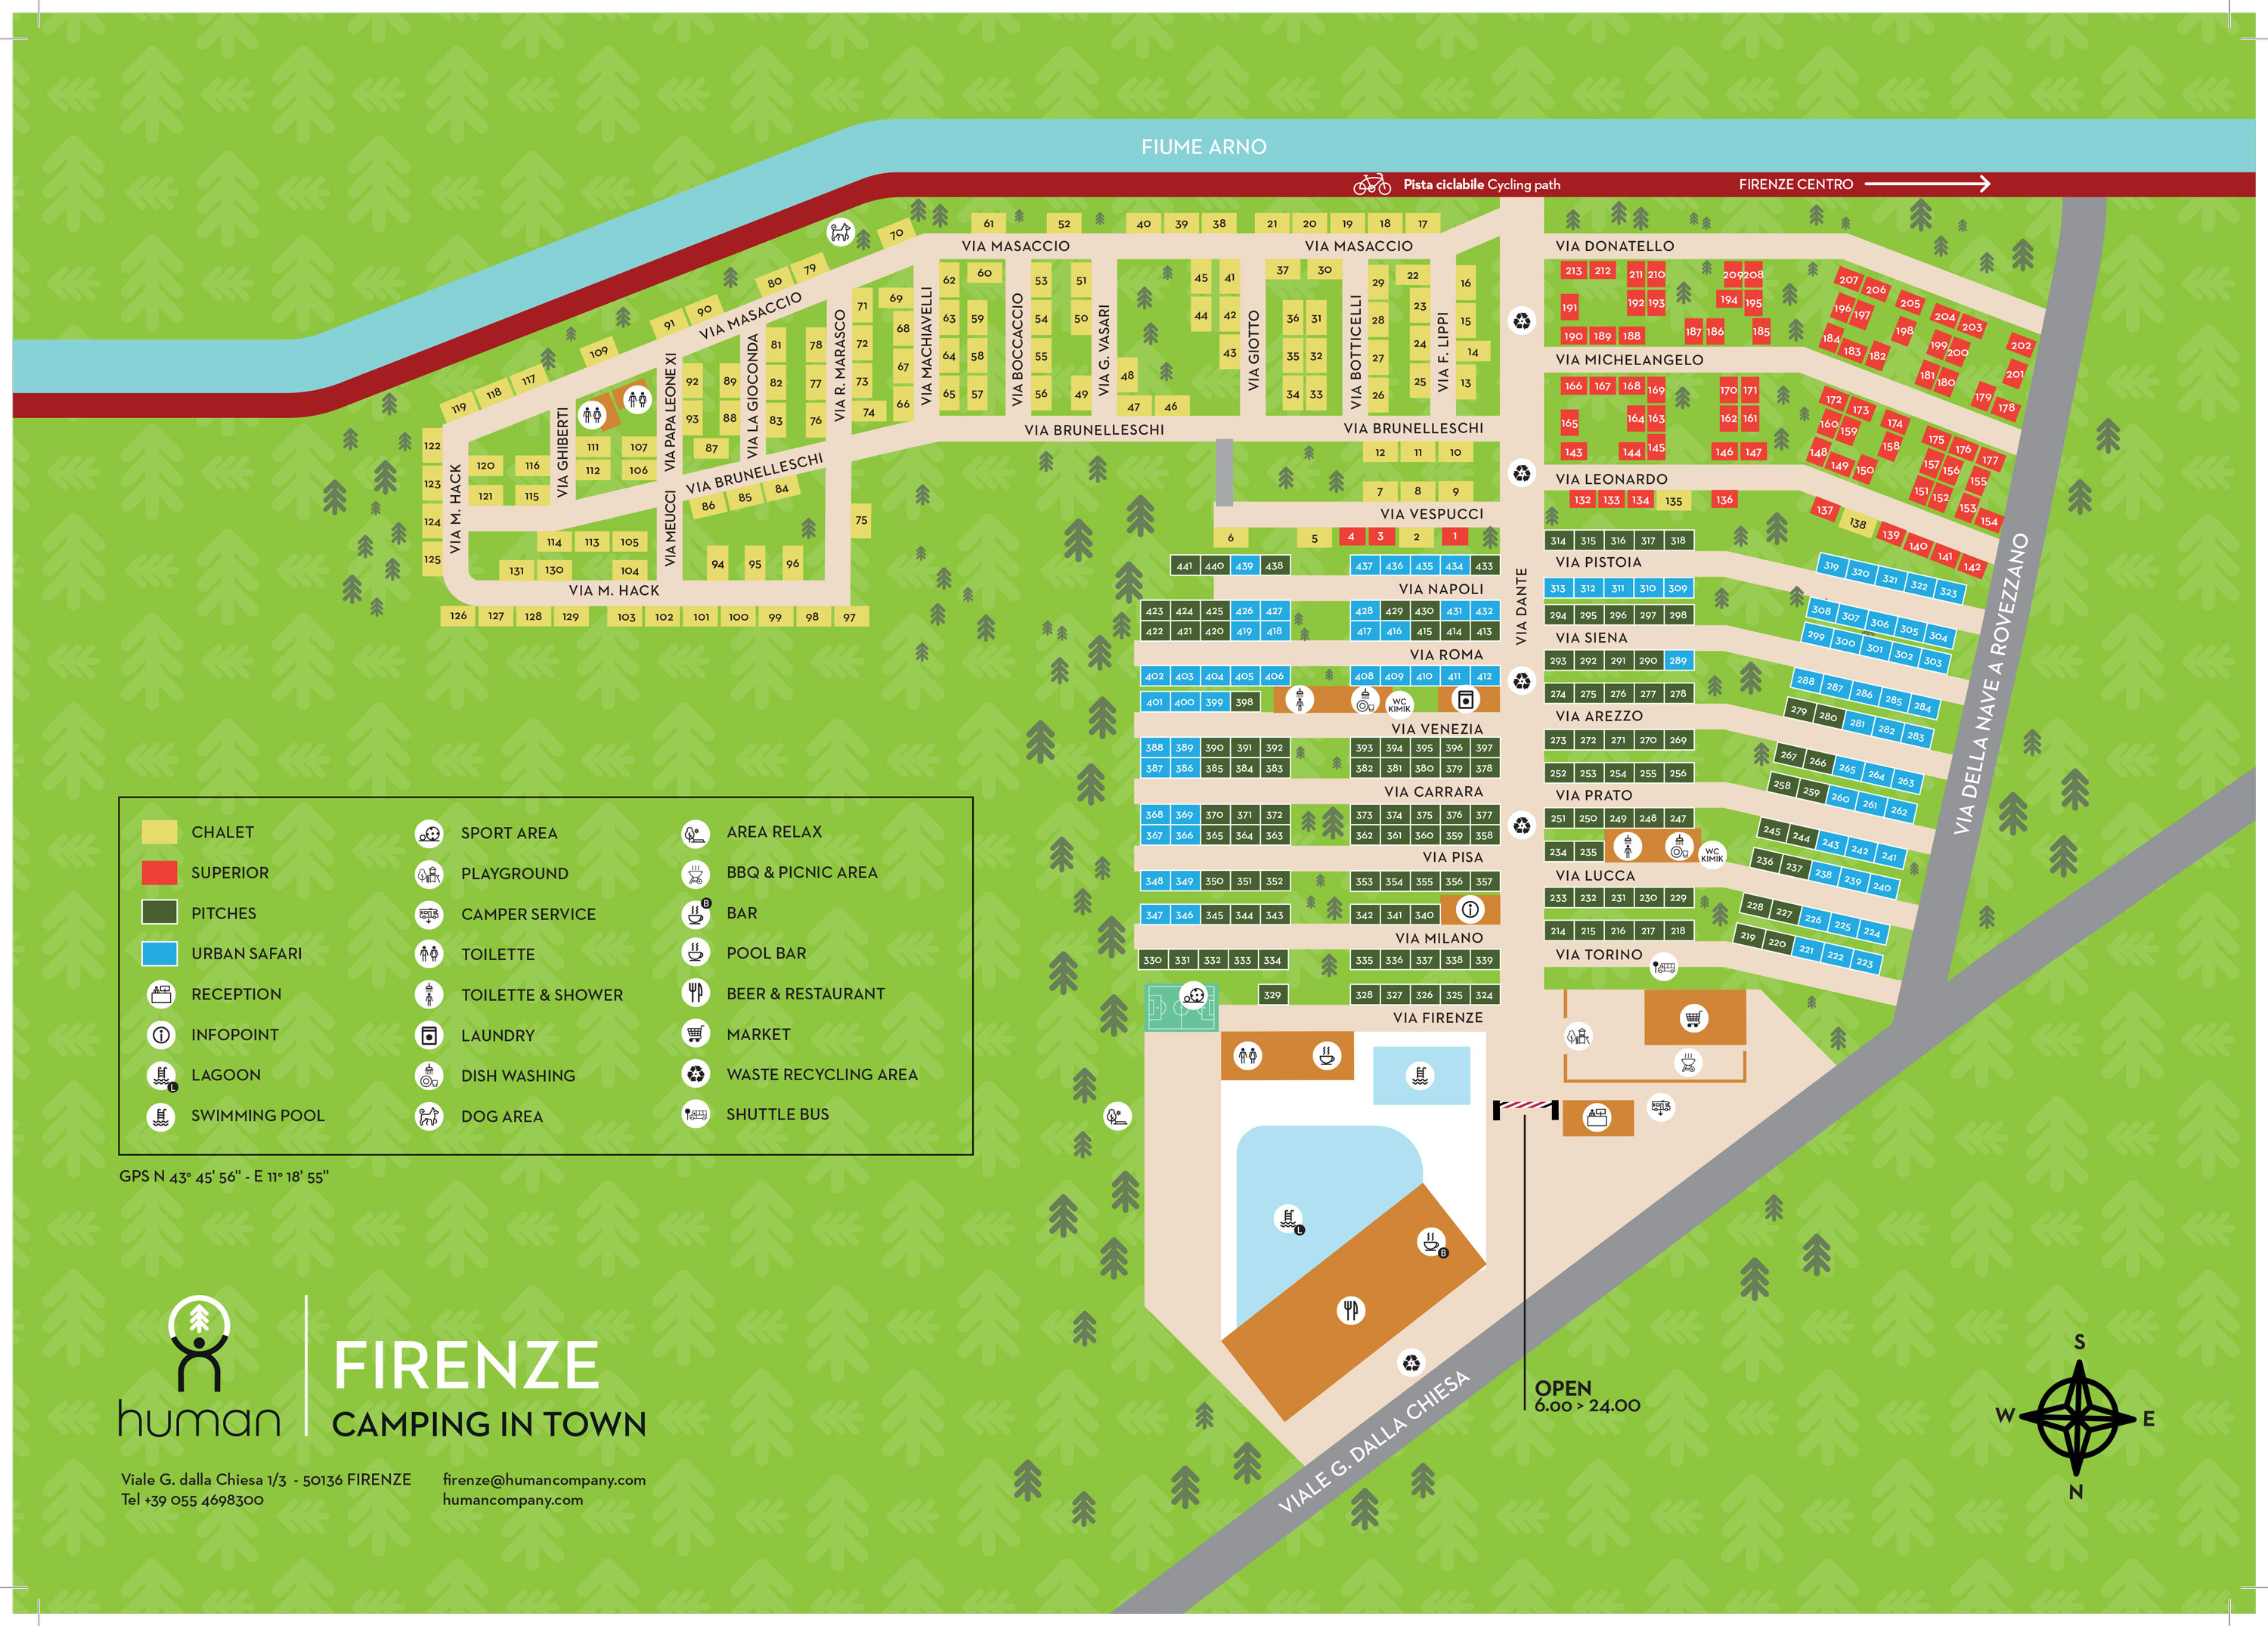 Plattegrond Firenze Camping in Town